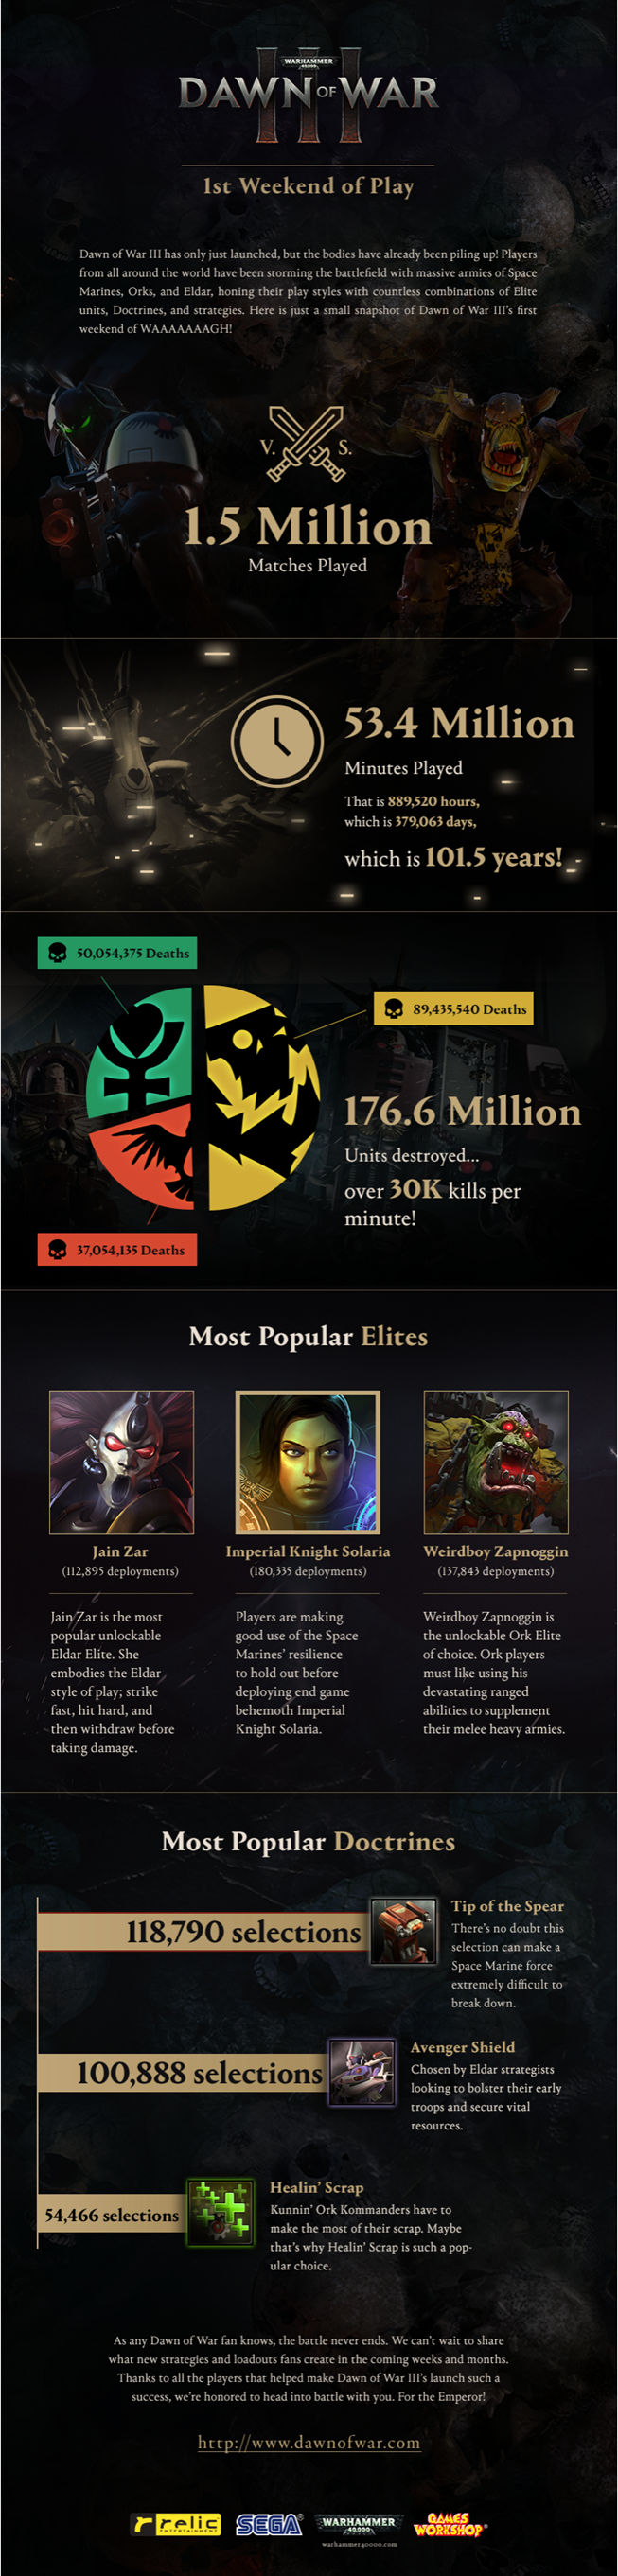 Dow3_Infographic_1stWeekend